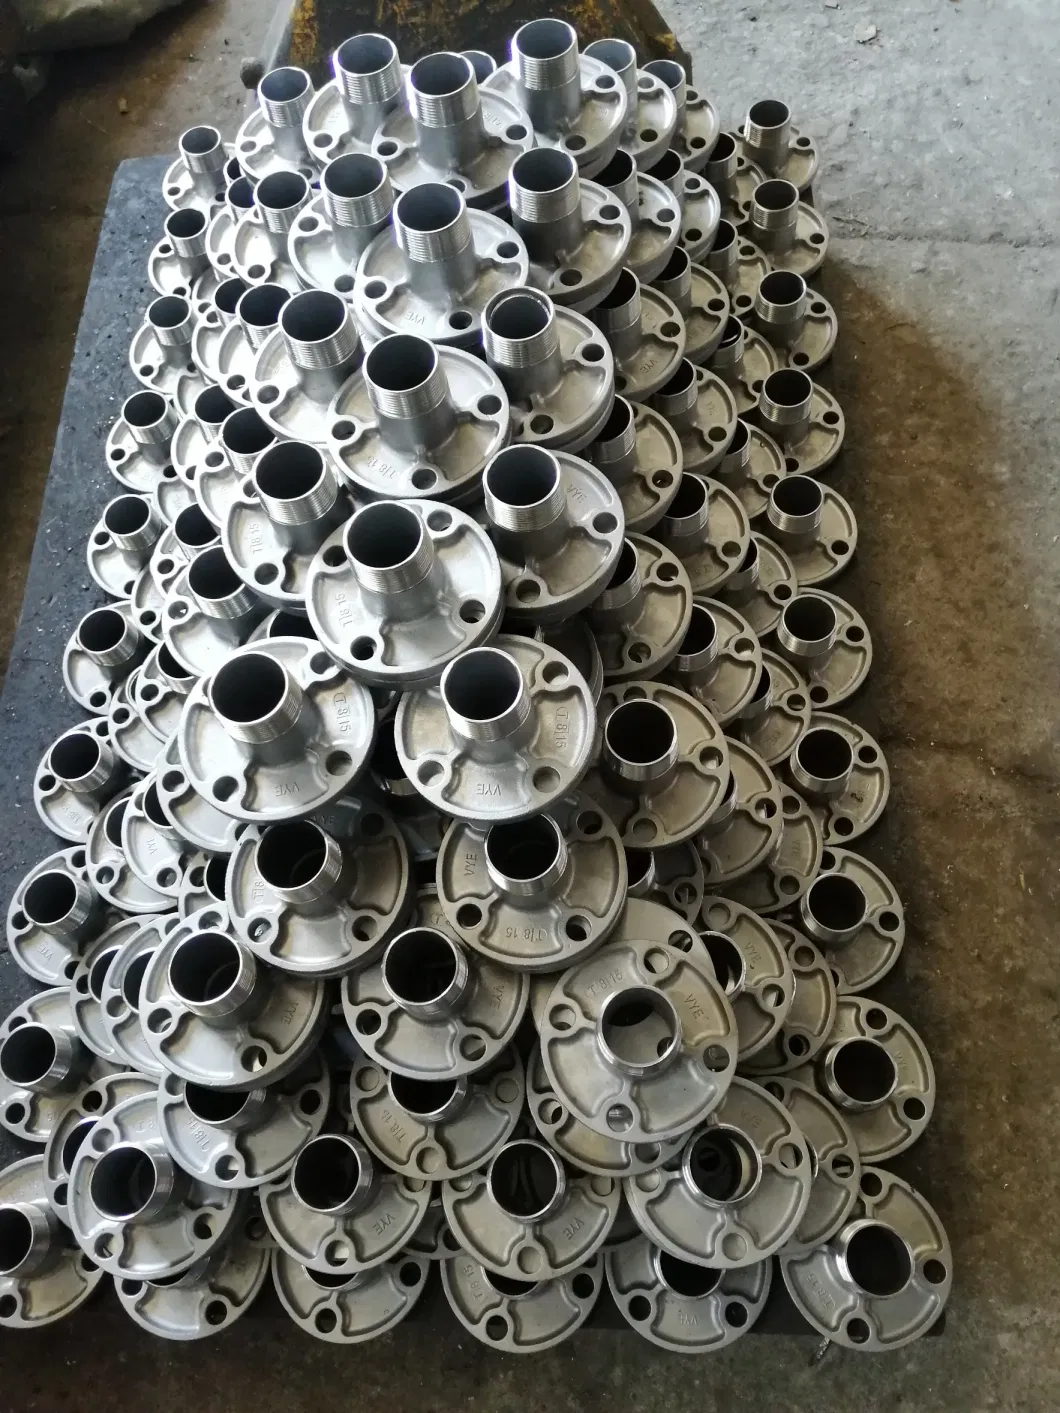 OEM Carbon Steel Stainless Steel Lost Wax Investment Casting Companies